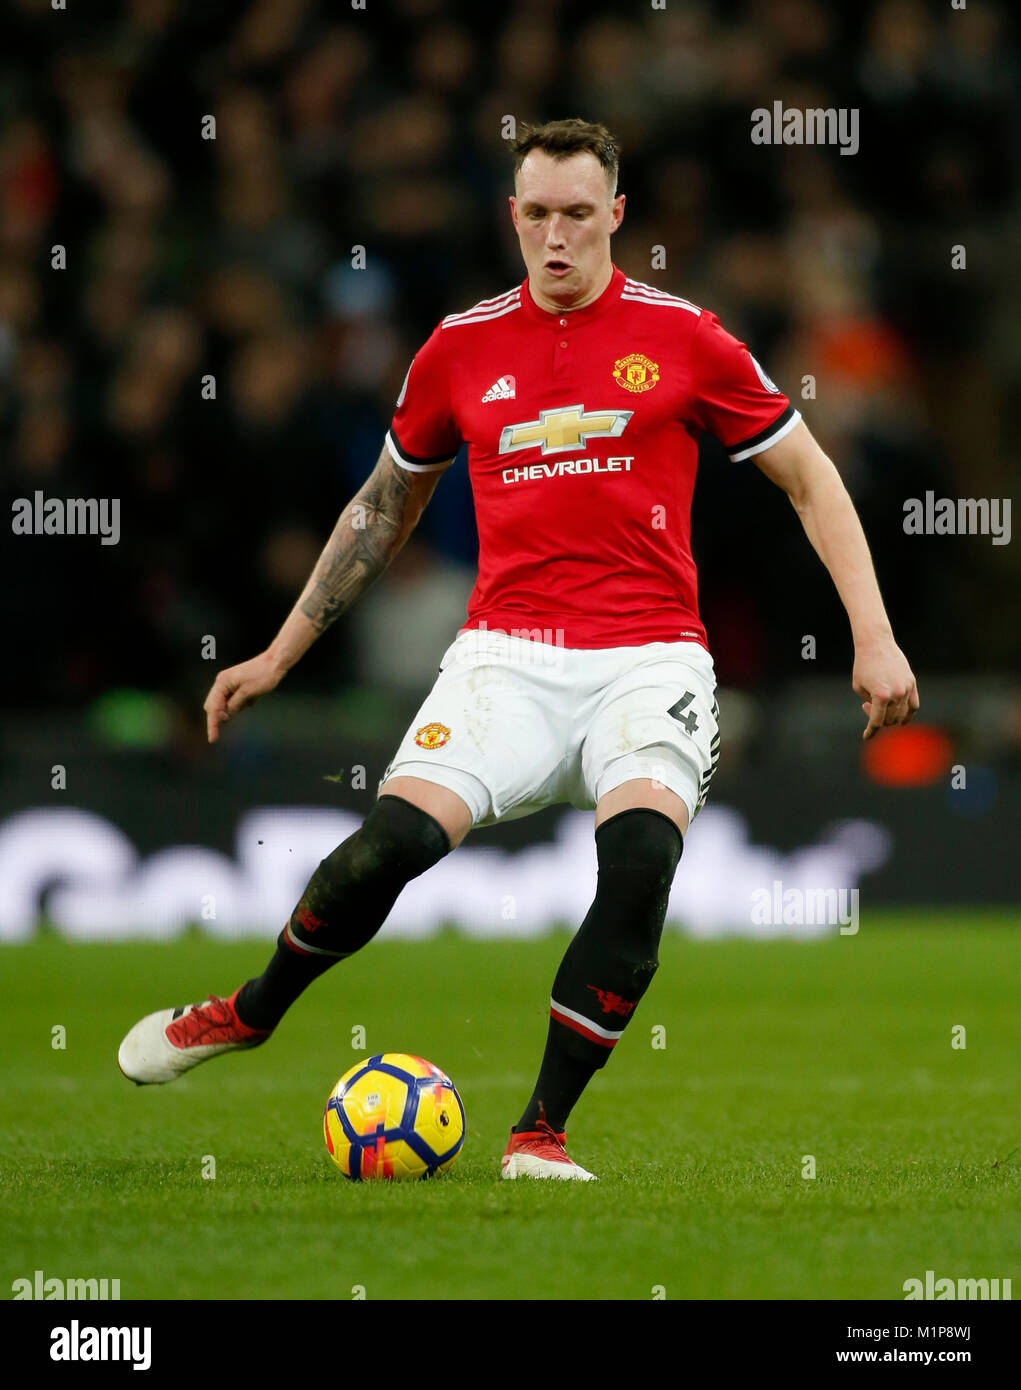 Phil Jones of Manchester United in action versus Tottenham Hotspur played at Wembley Stadium on 31st January 2018 Stock Photo